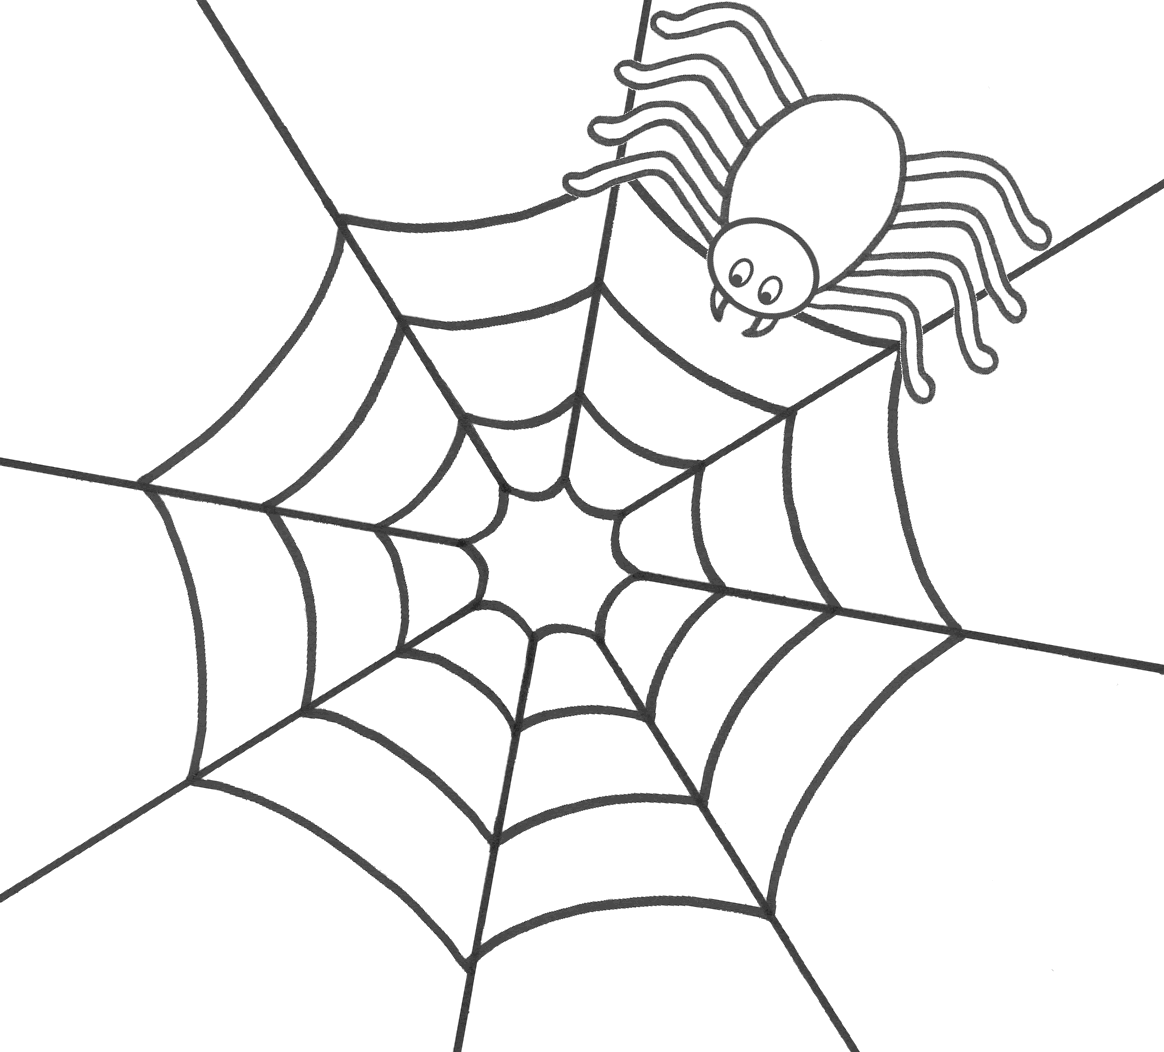 print the coloring animals arachnids spider number id 63192 ...